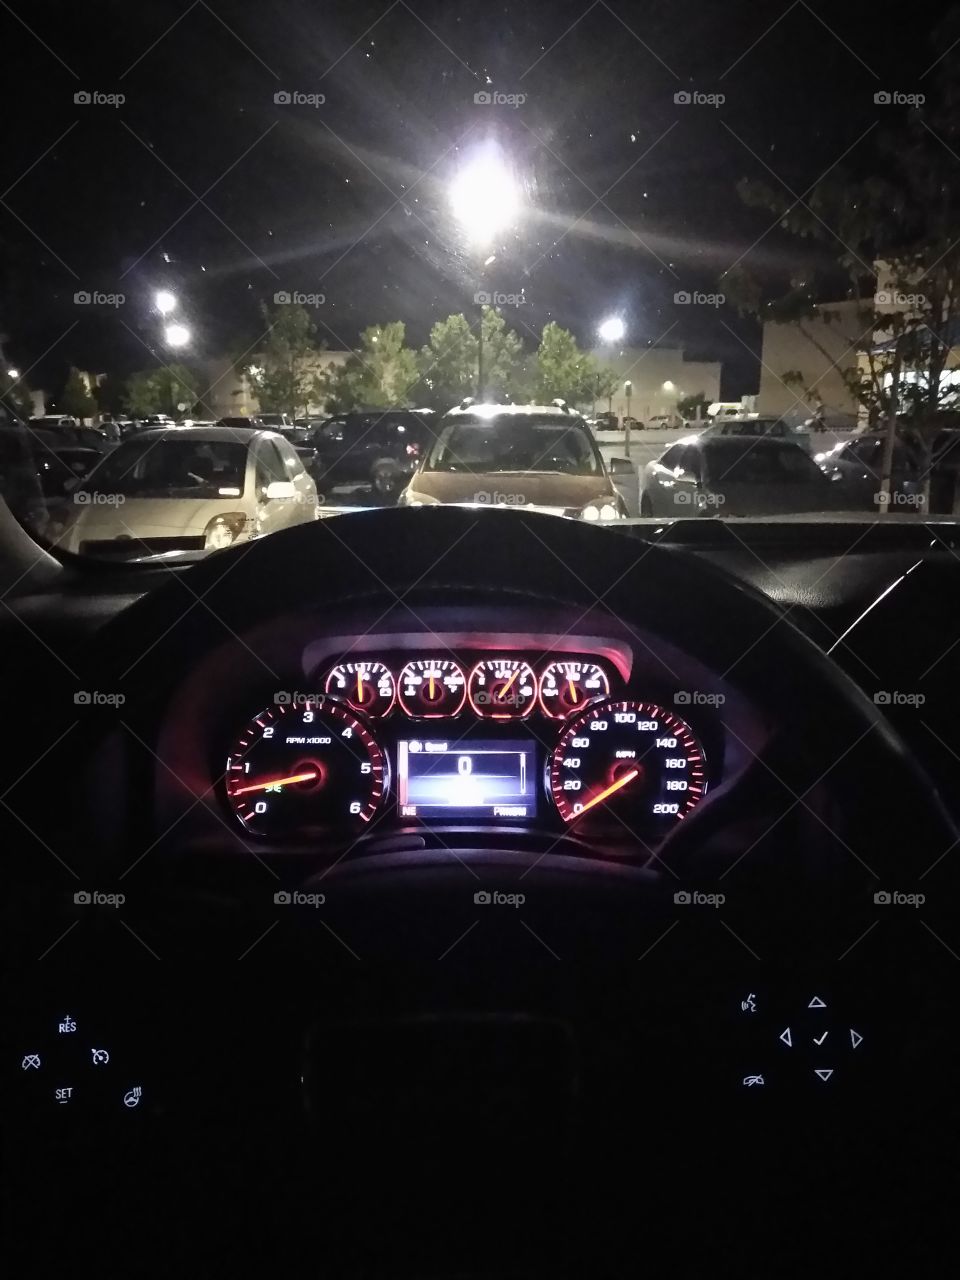 Dashboard, looking out into a full parking lot.